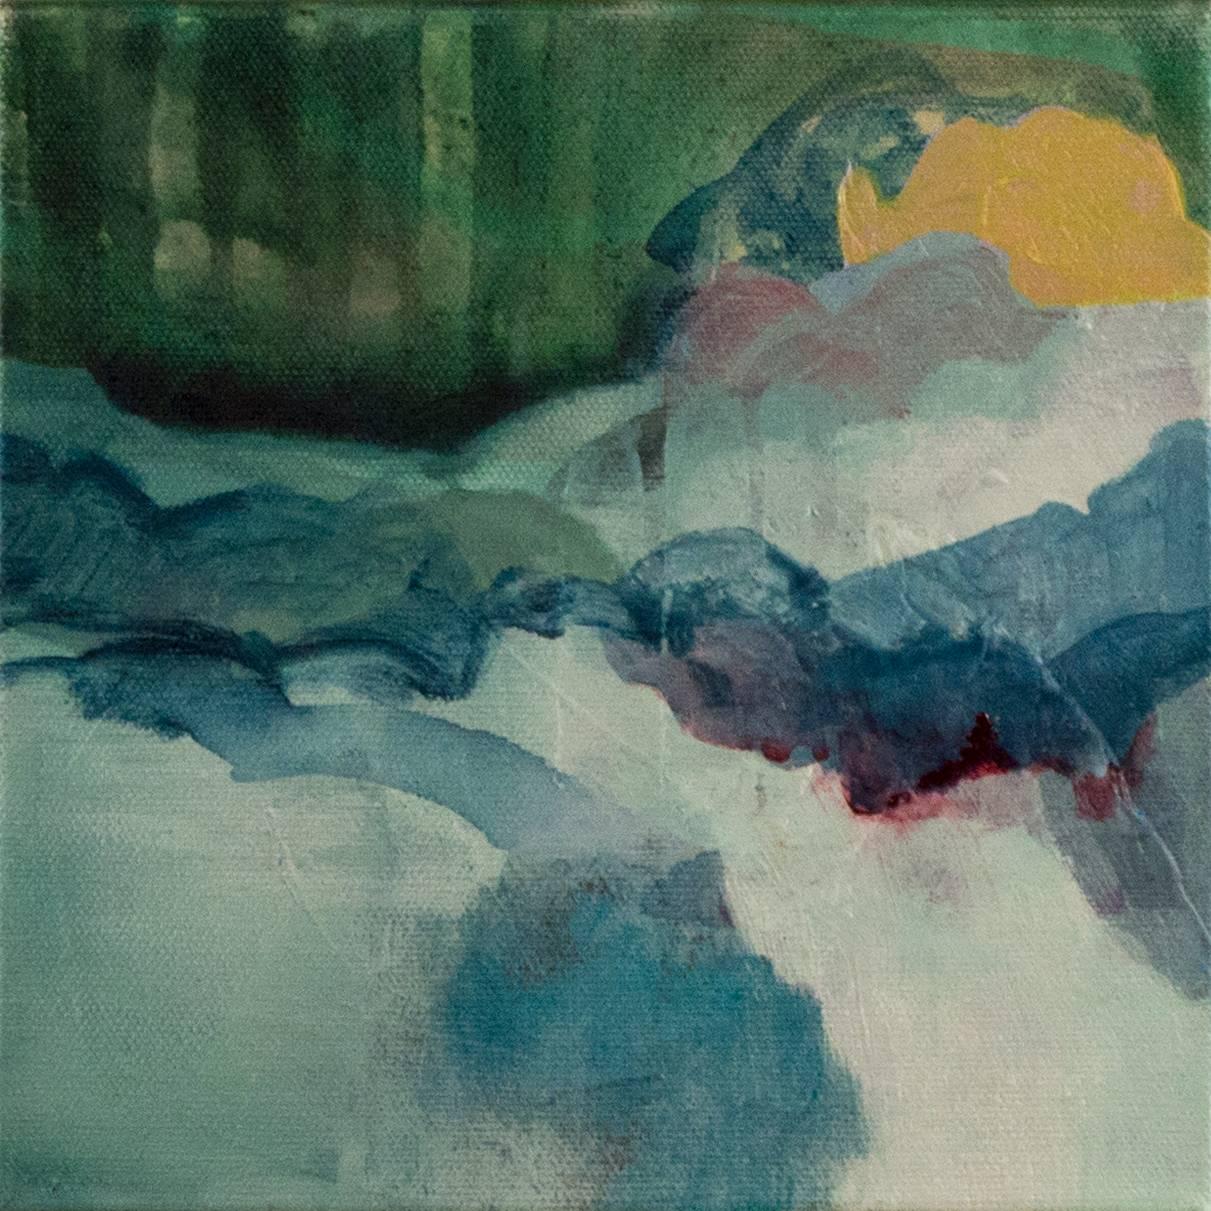 "A Glimpse of Heaven Inside" is Ananda Kesler's 2016 acrylic on canvas abstract landscape painting, signed on verso.

8" x 8"

Ananda Kesler was born in Haifa, Israel. In 2002 she received her BA in Fine Art from the University of Iowa. She has